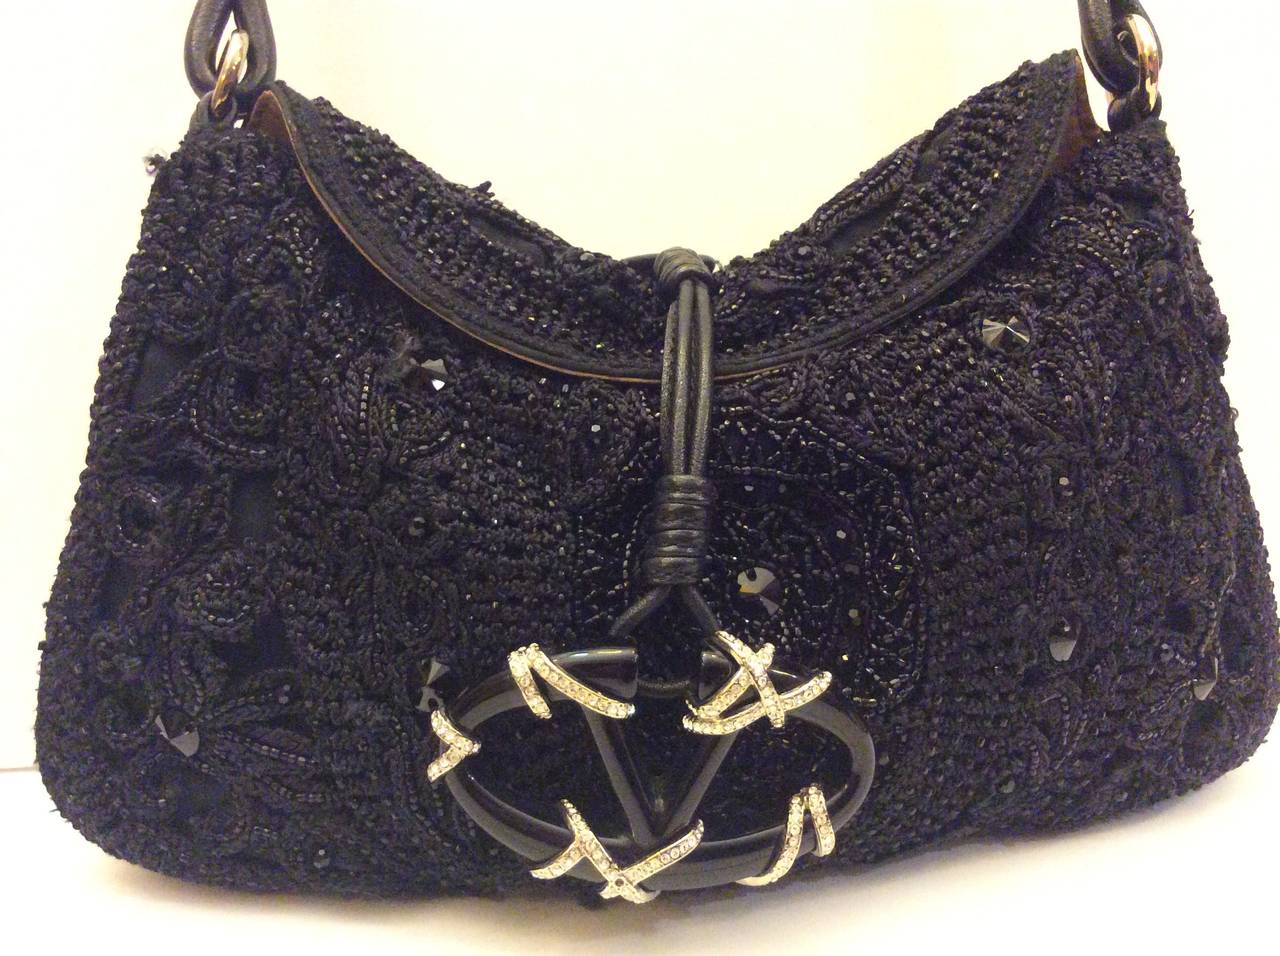 This is a stunning Valentino Garavani Black silk crochet embellished with beaded sequins and crystals evening handbag. Minimal flap closure with classic leather strap and traditional large V toggle encrusted the crystals. 
Beige silver lining with